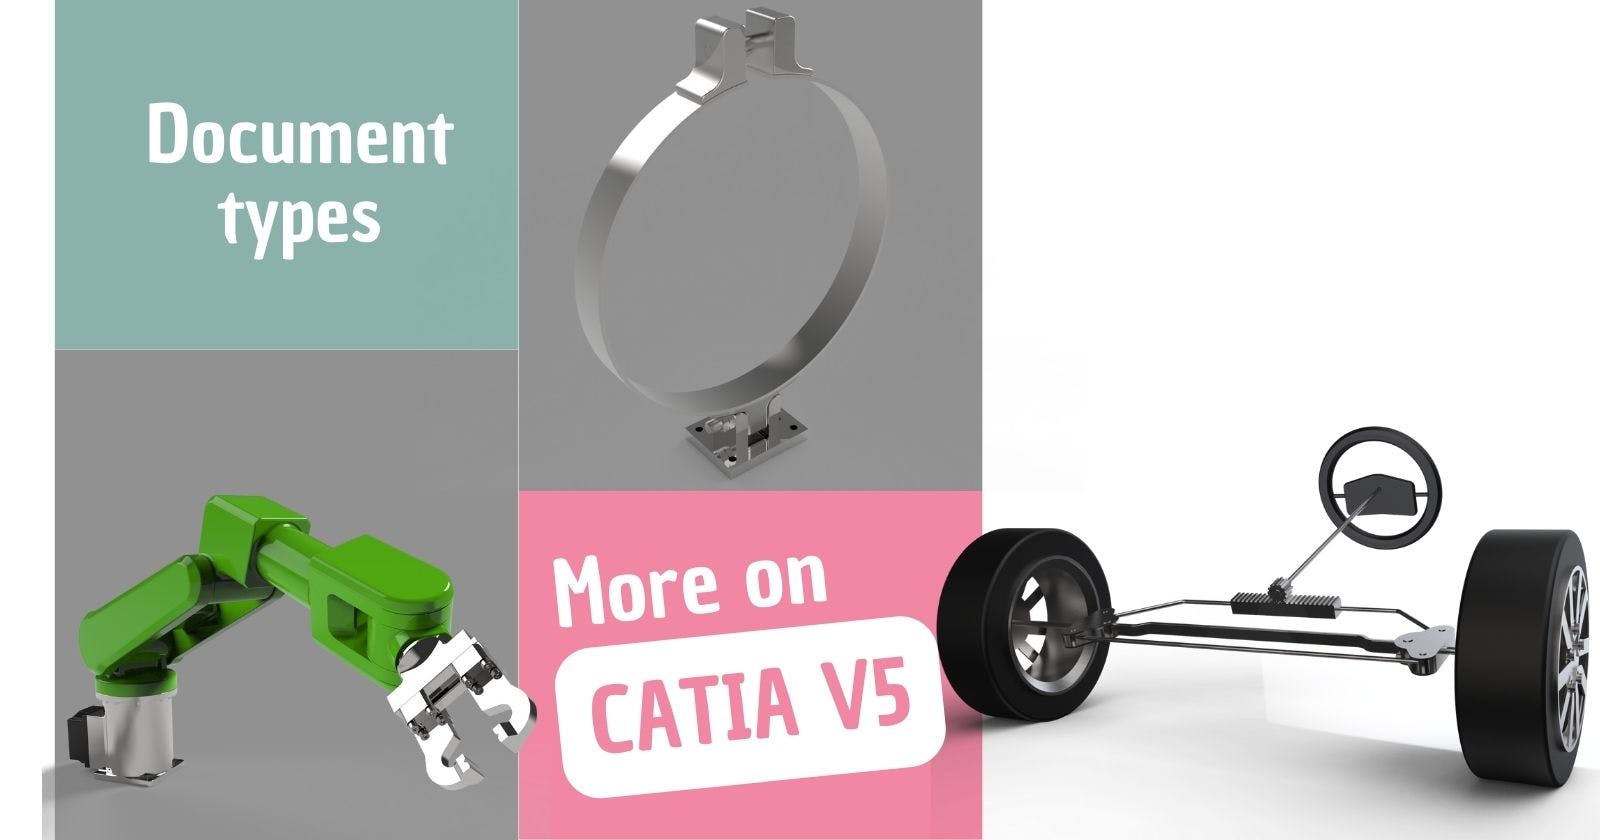 CATIA V5: The Ultimate Guide to the Three Document Types